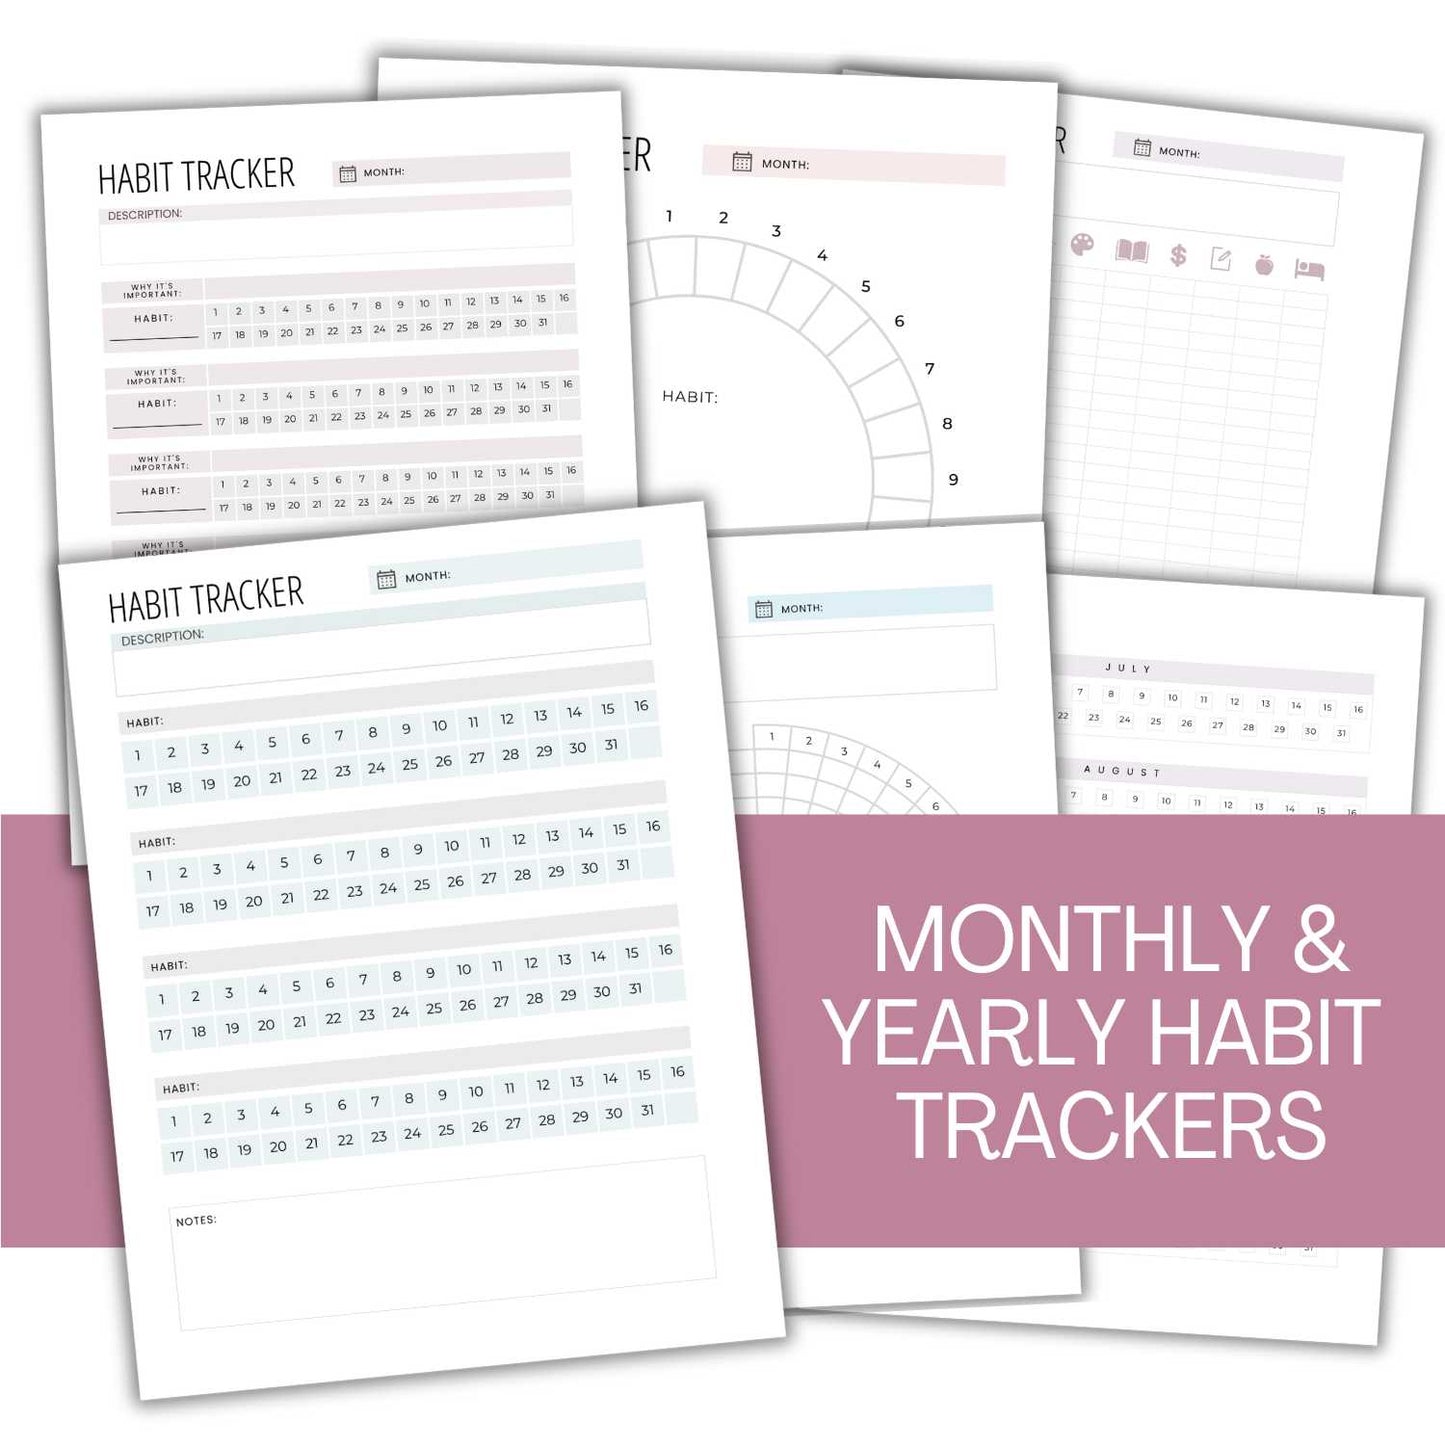 Monthly & Yearly Habit Trackers fanned out